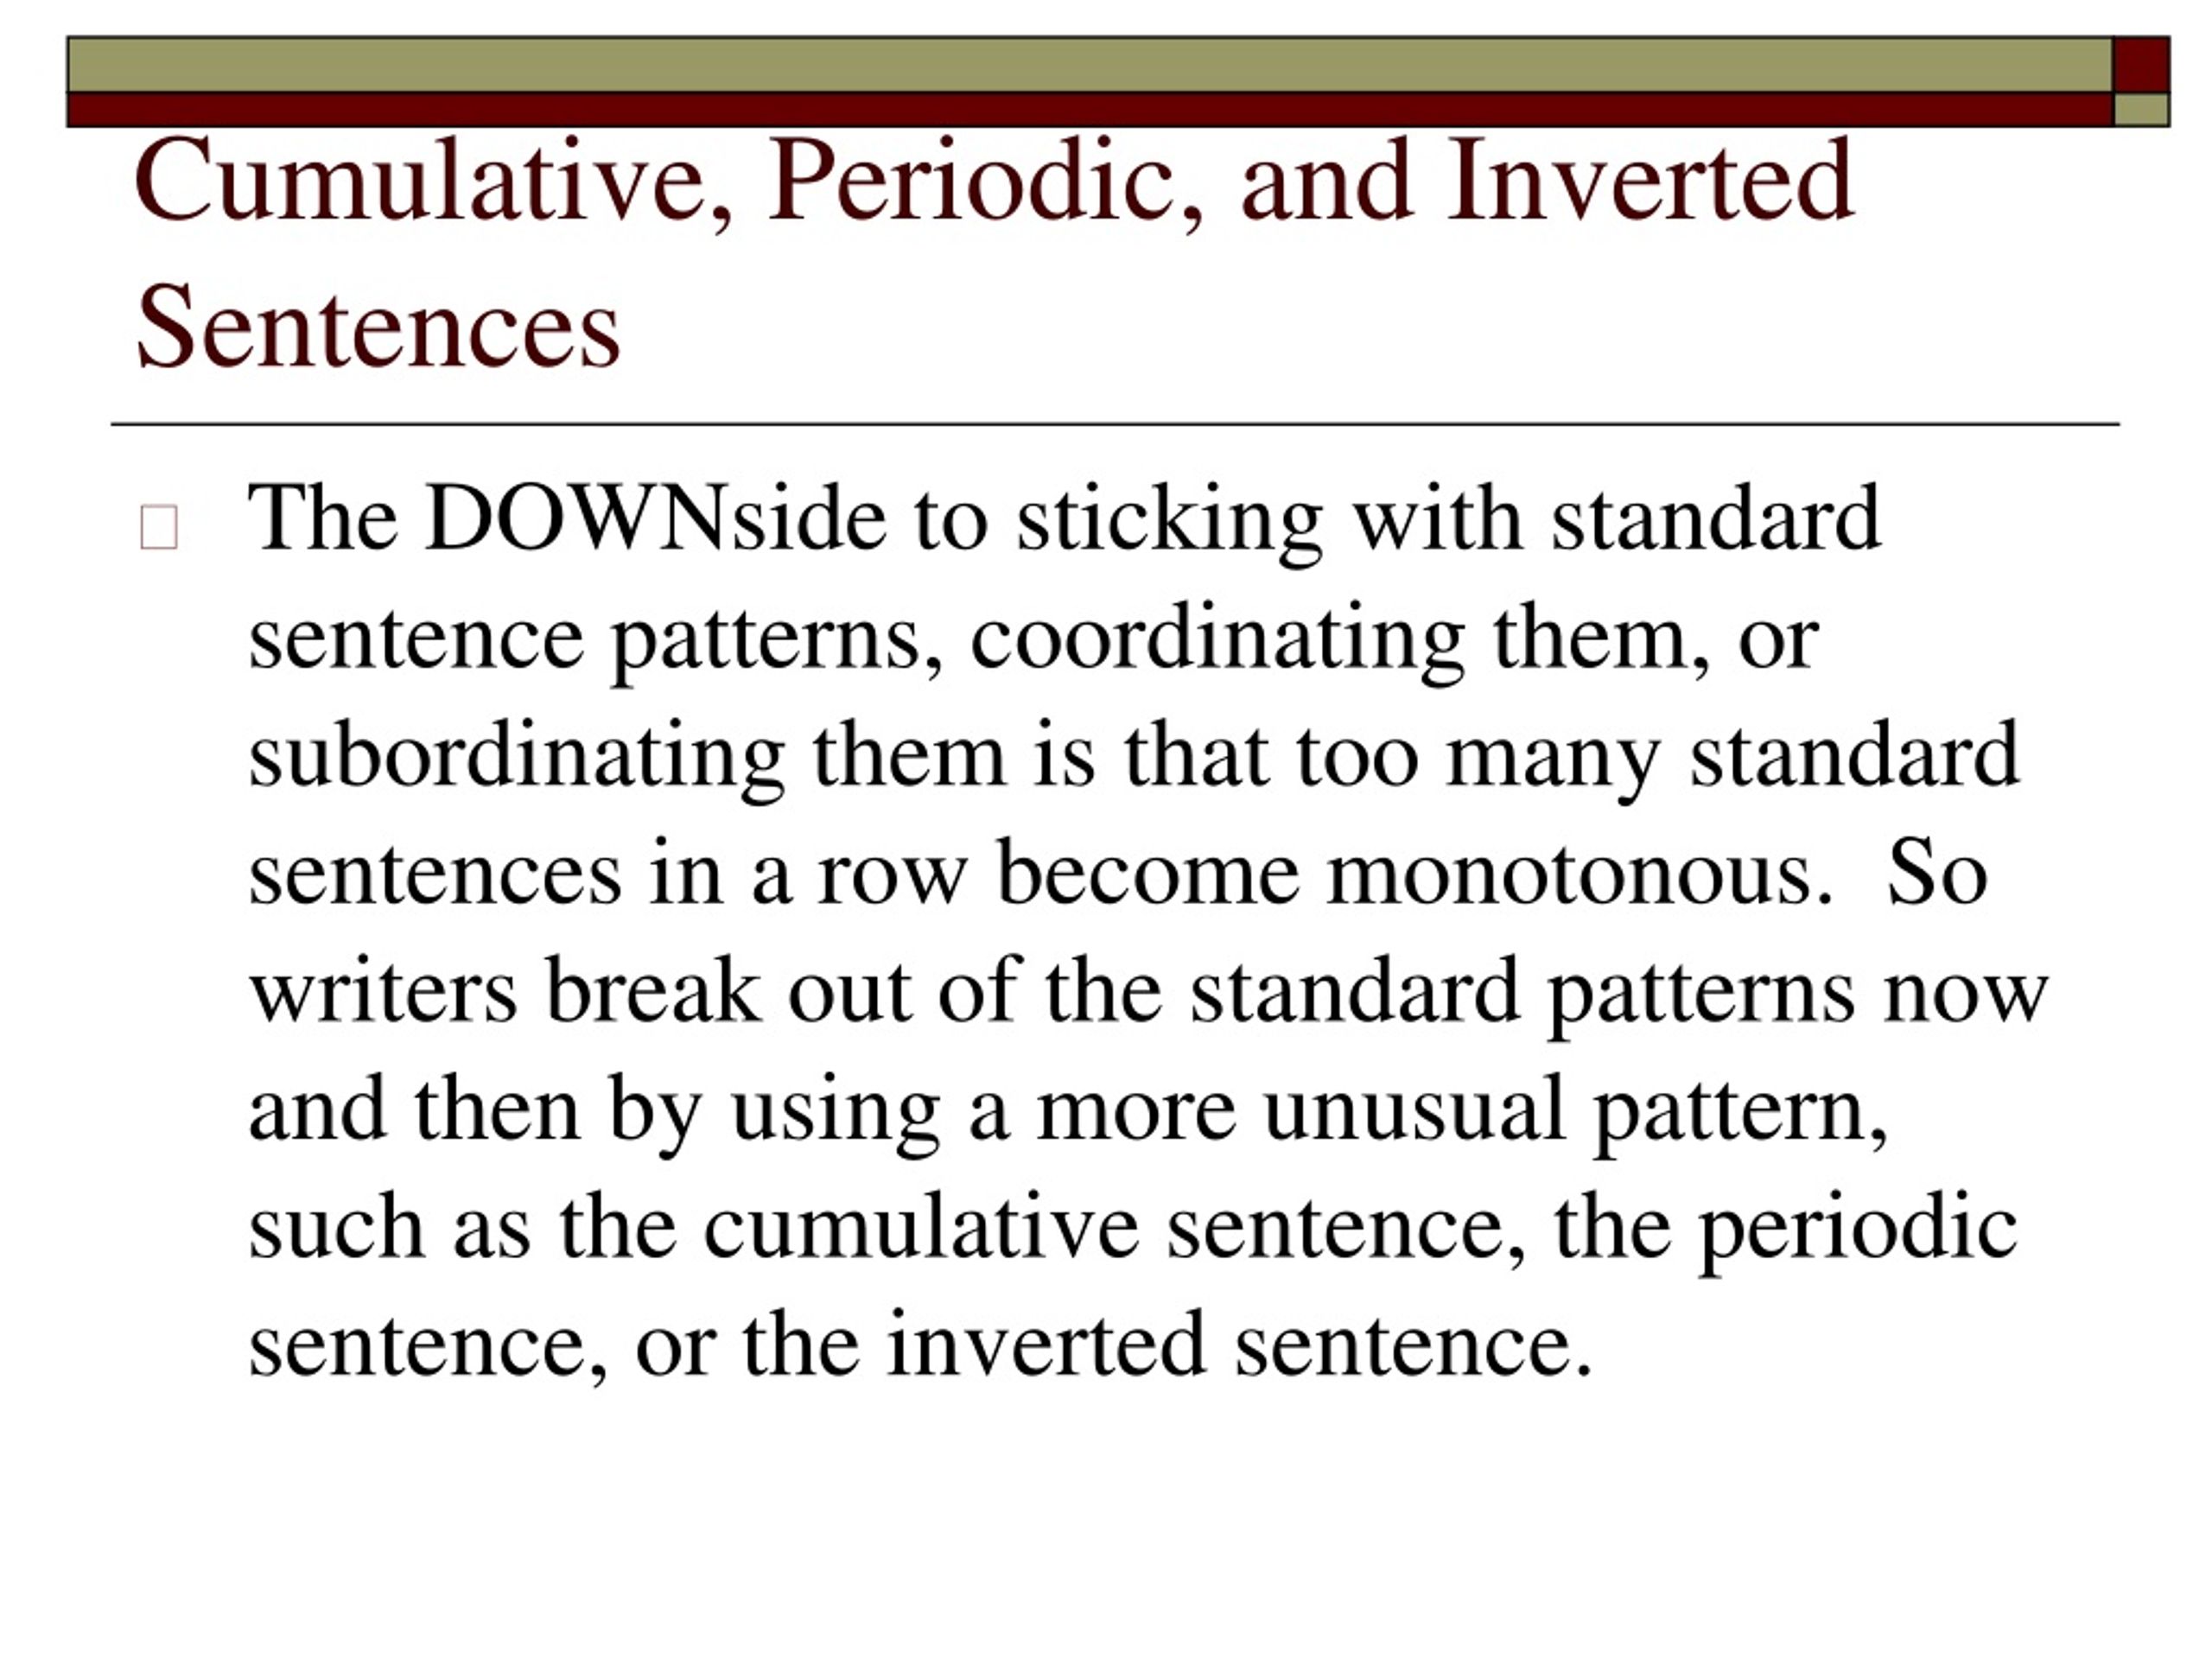 Worksheet On Cumulative And Periodic Sentences Answers